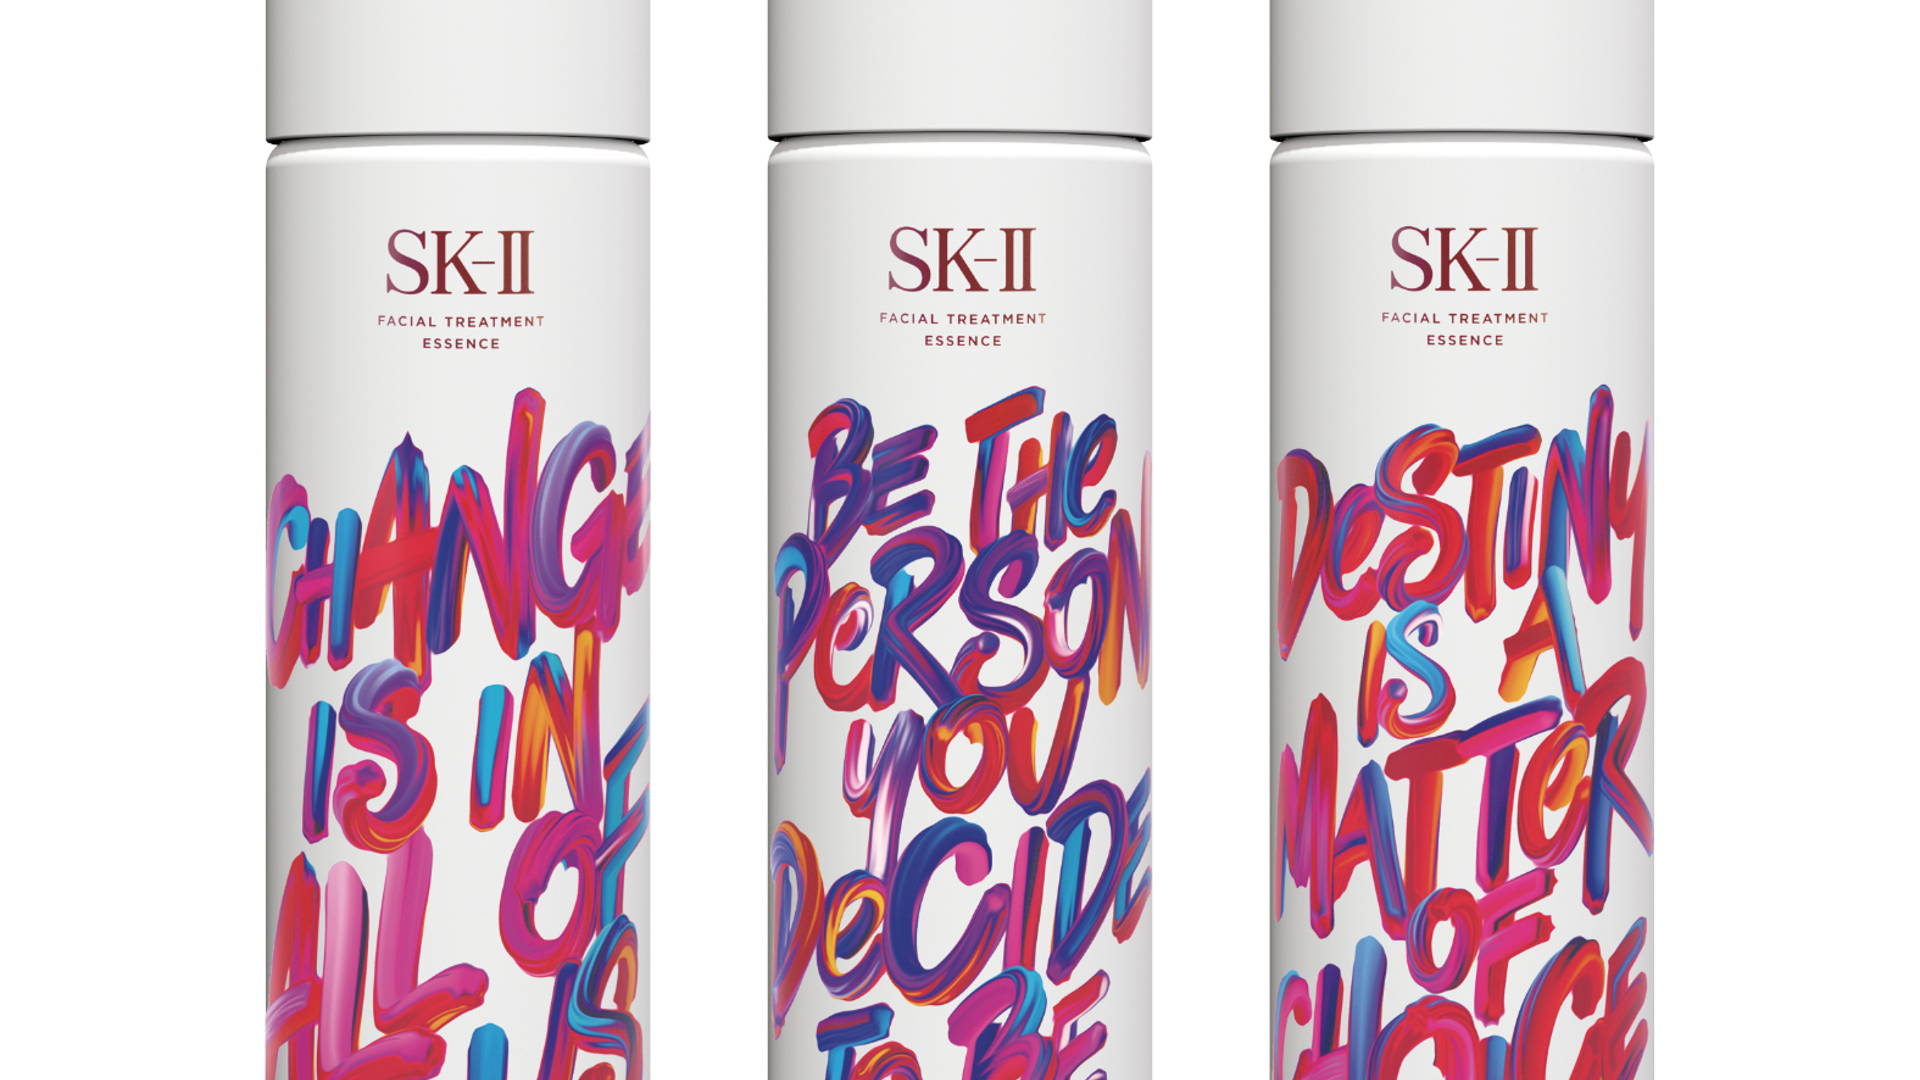 Featured image for This Limited Edition Skincare Packaging Comes With Inspiring Messages